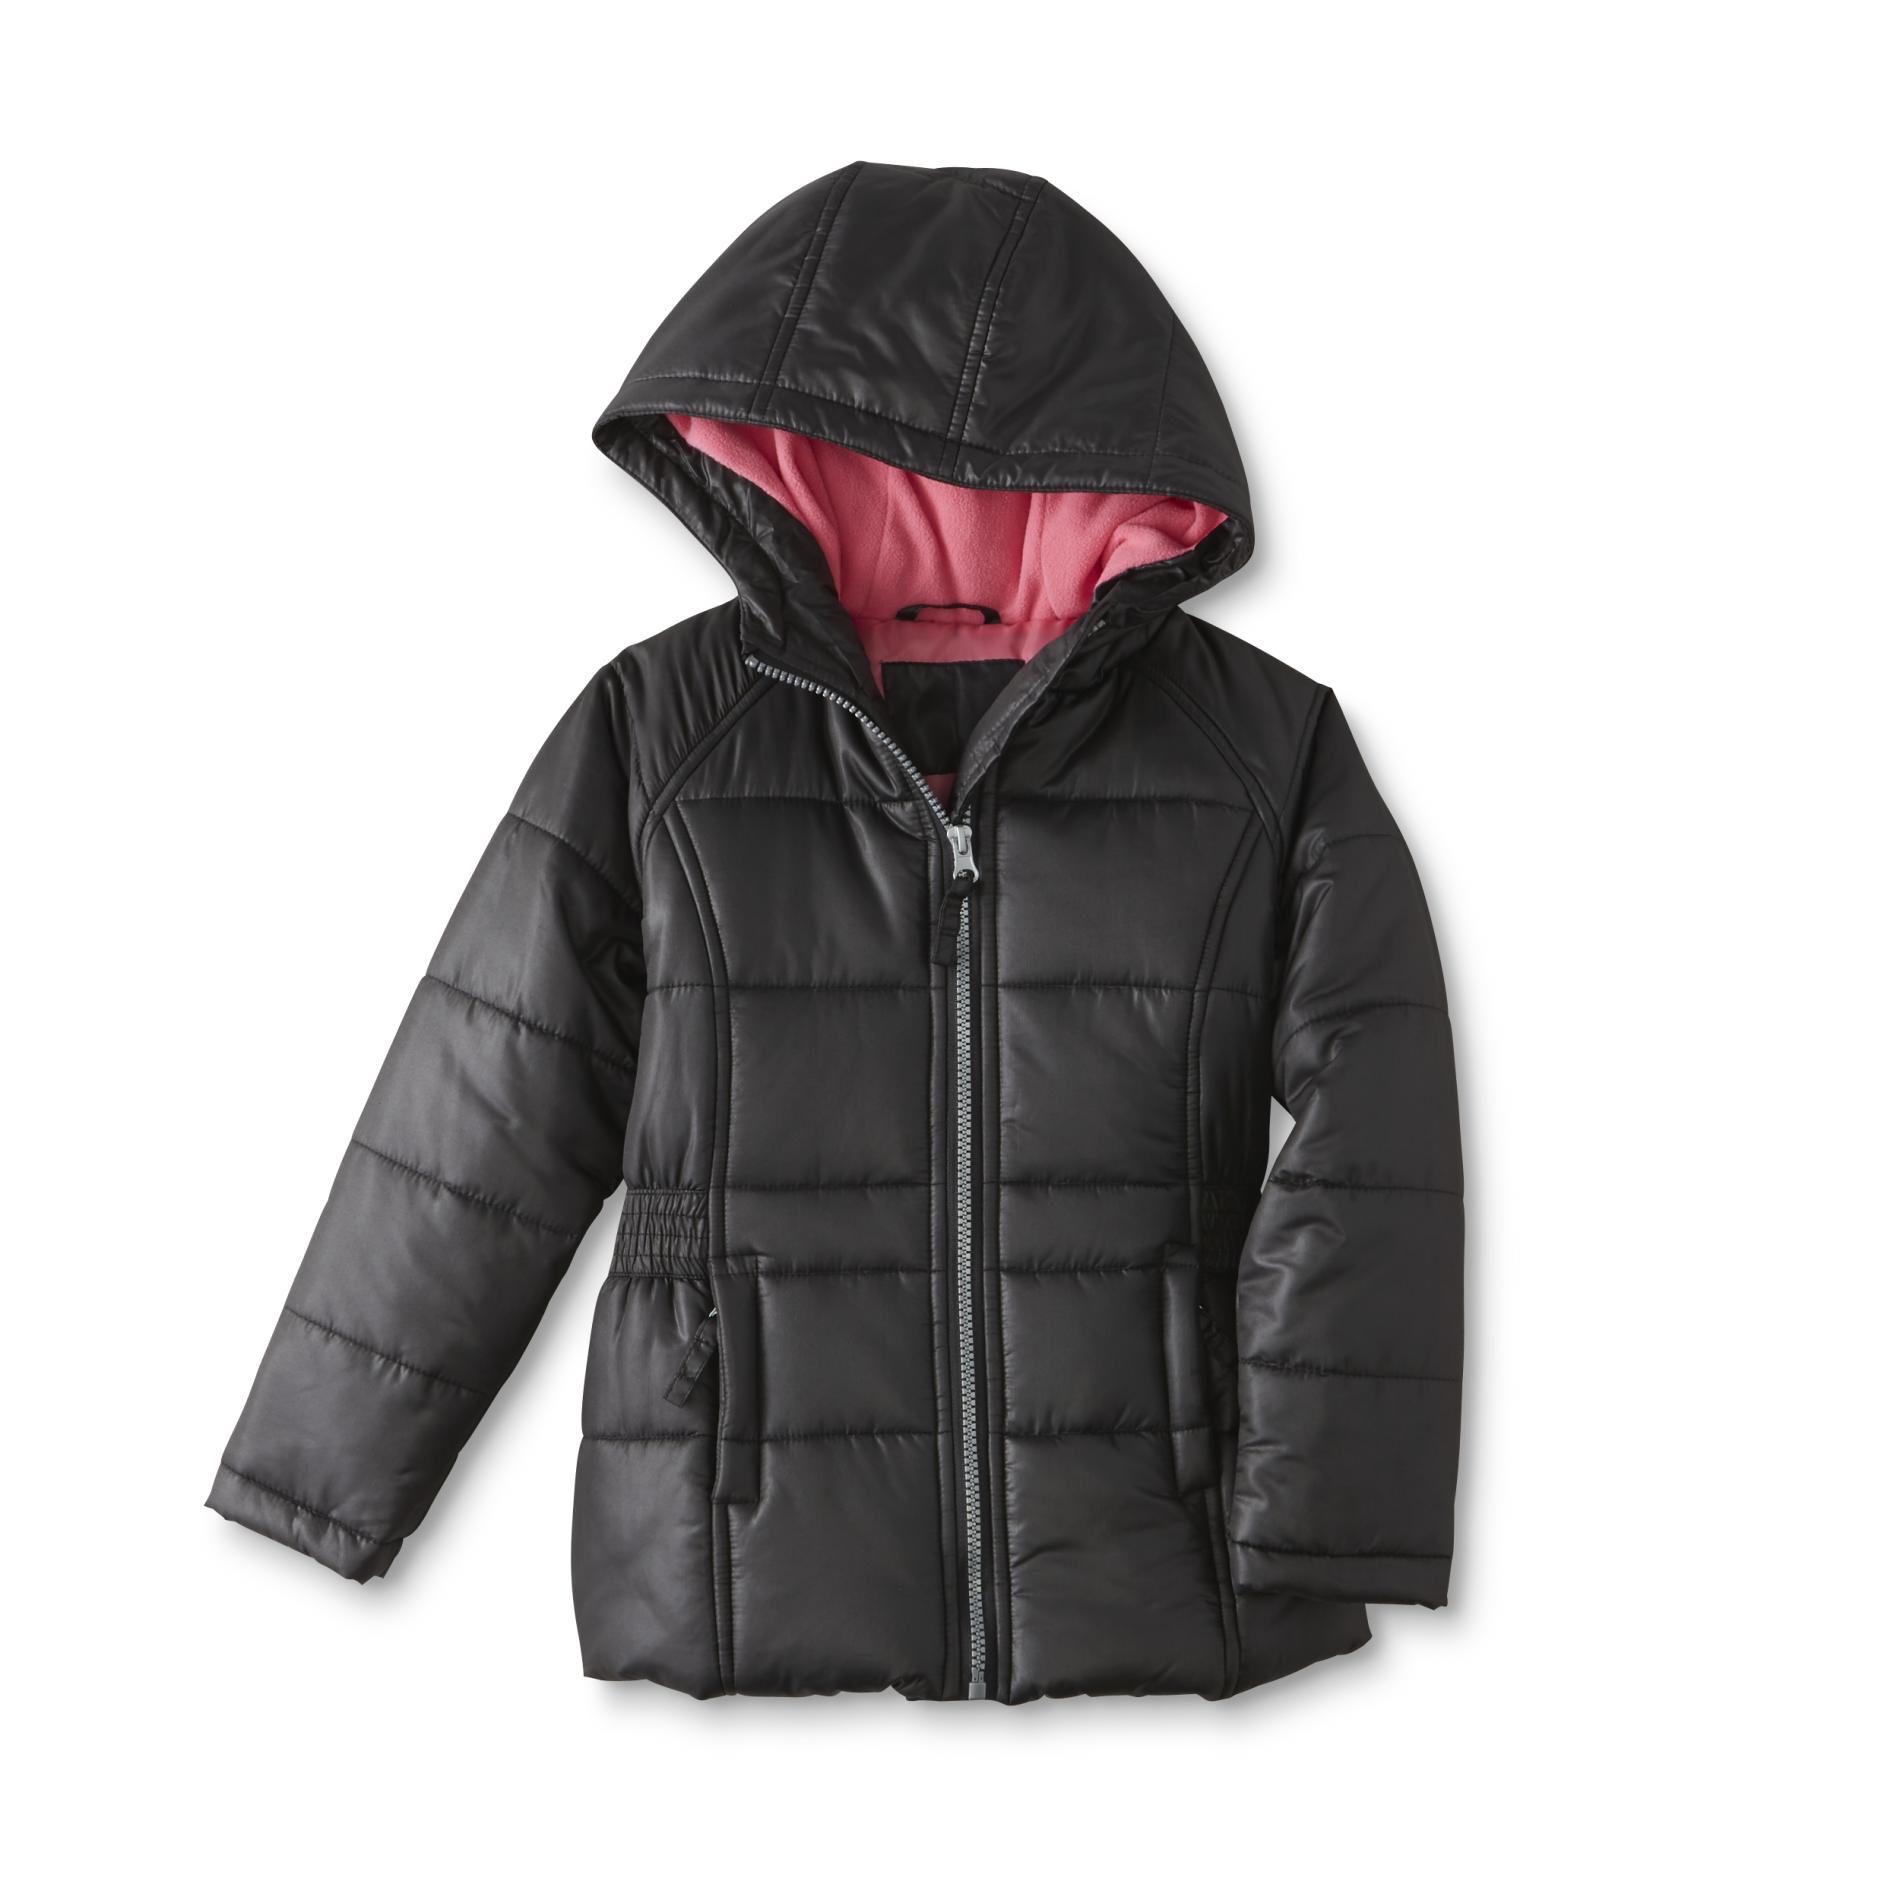 Simply Styled Girl's Hooded Puffer Coat